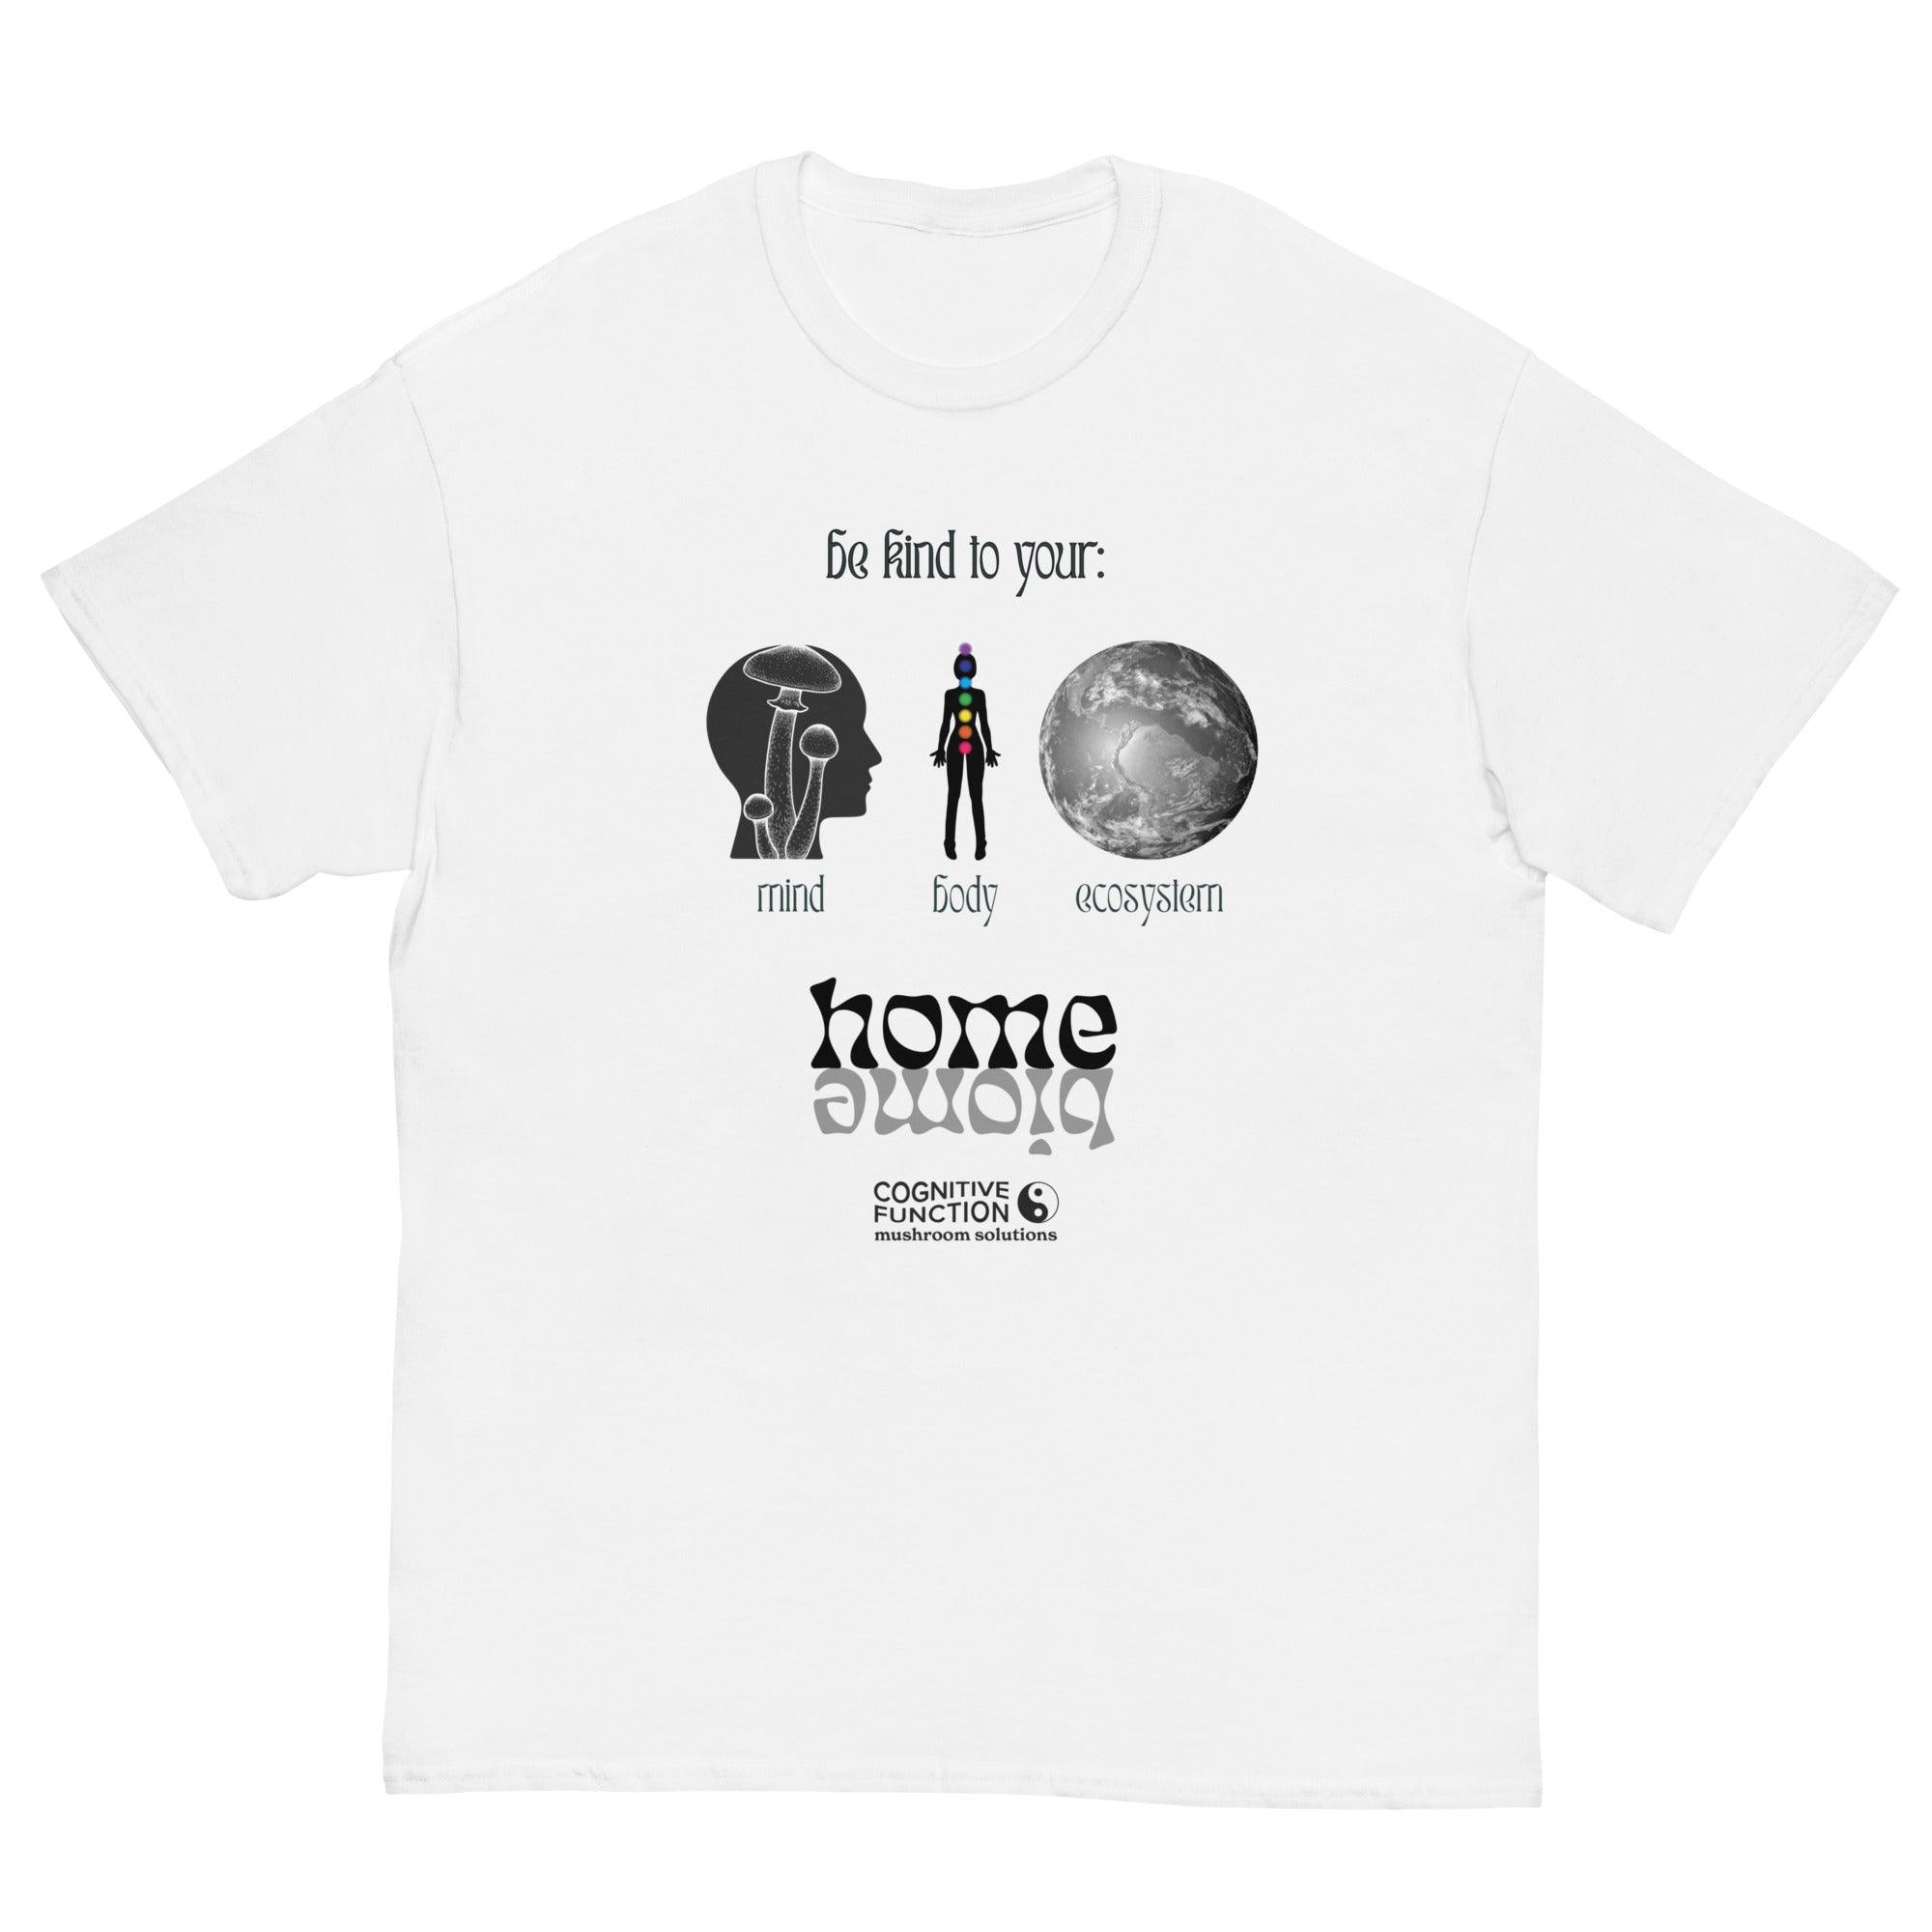 Be Kind To Your Biome Tee - Cognitive Function